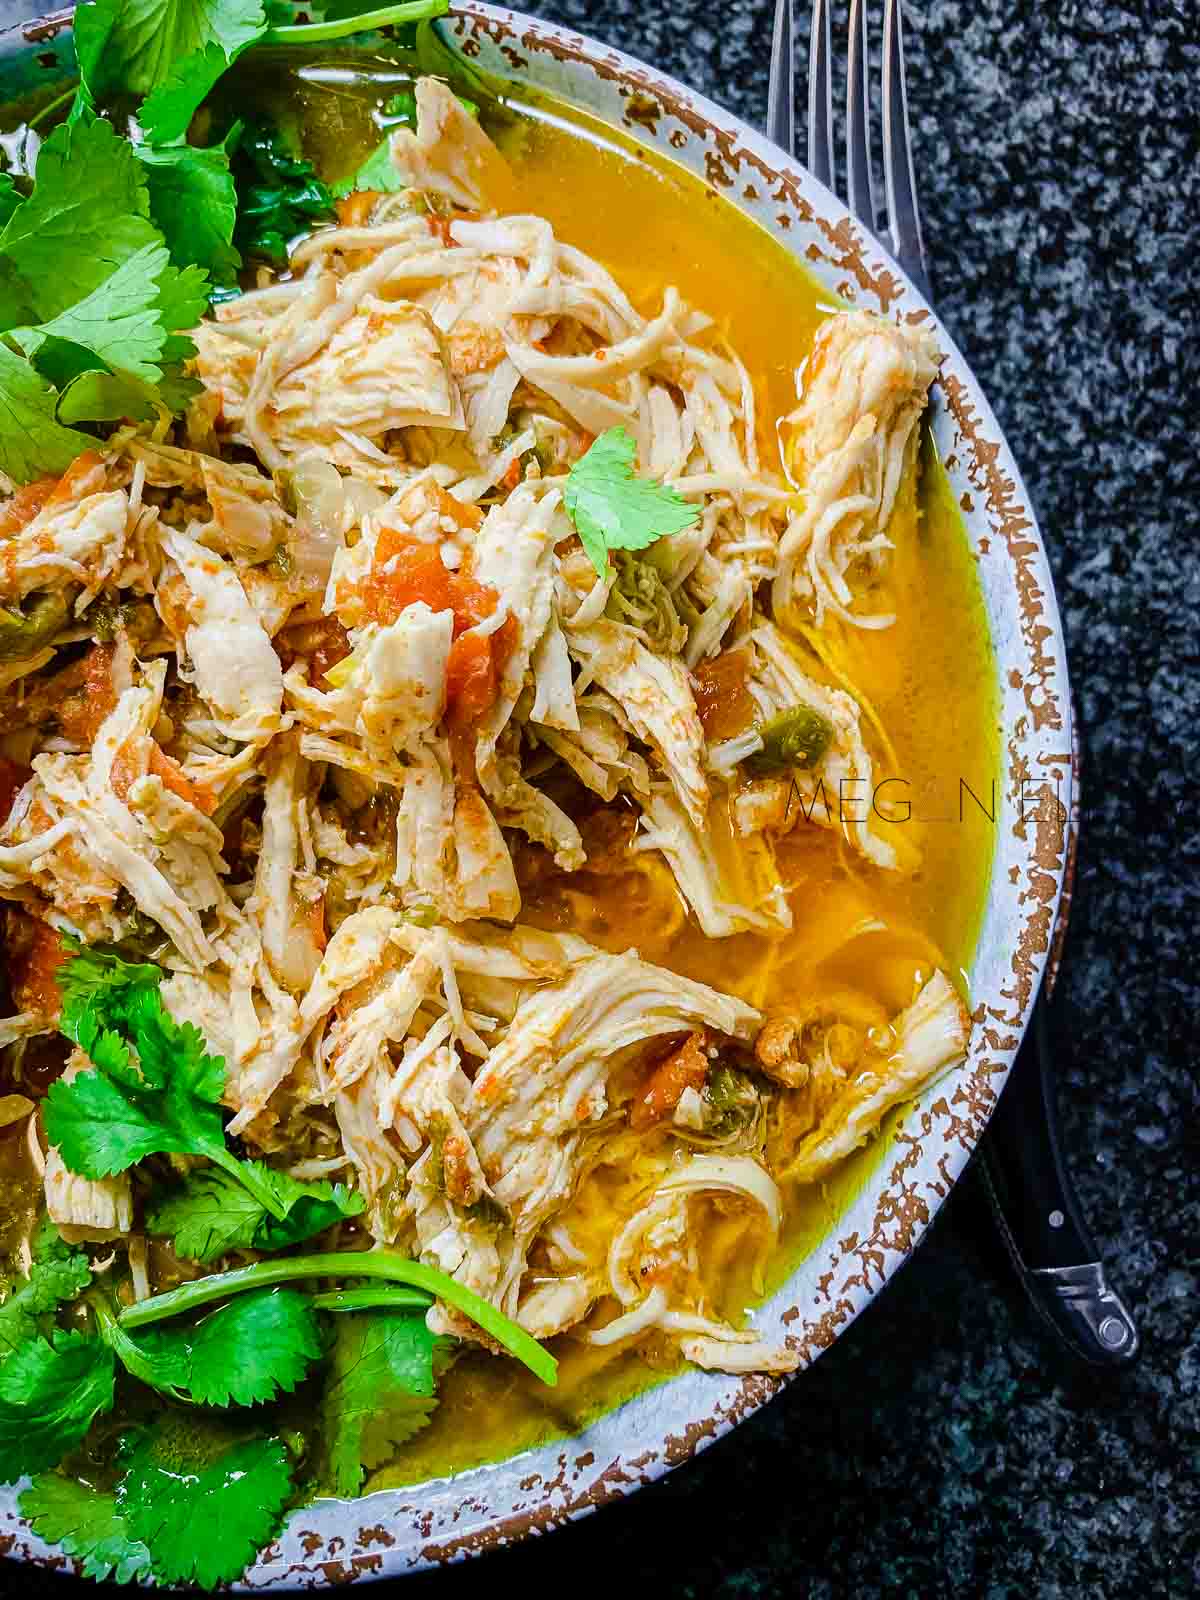 A close up of shredded chicken with fresh coriander leaves on top.